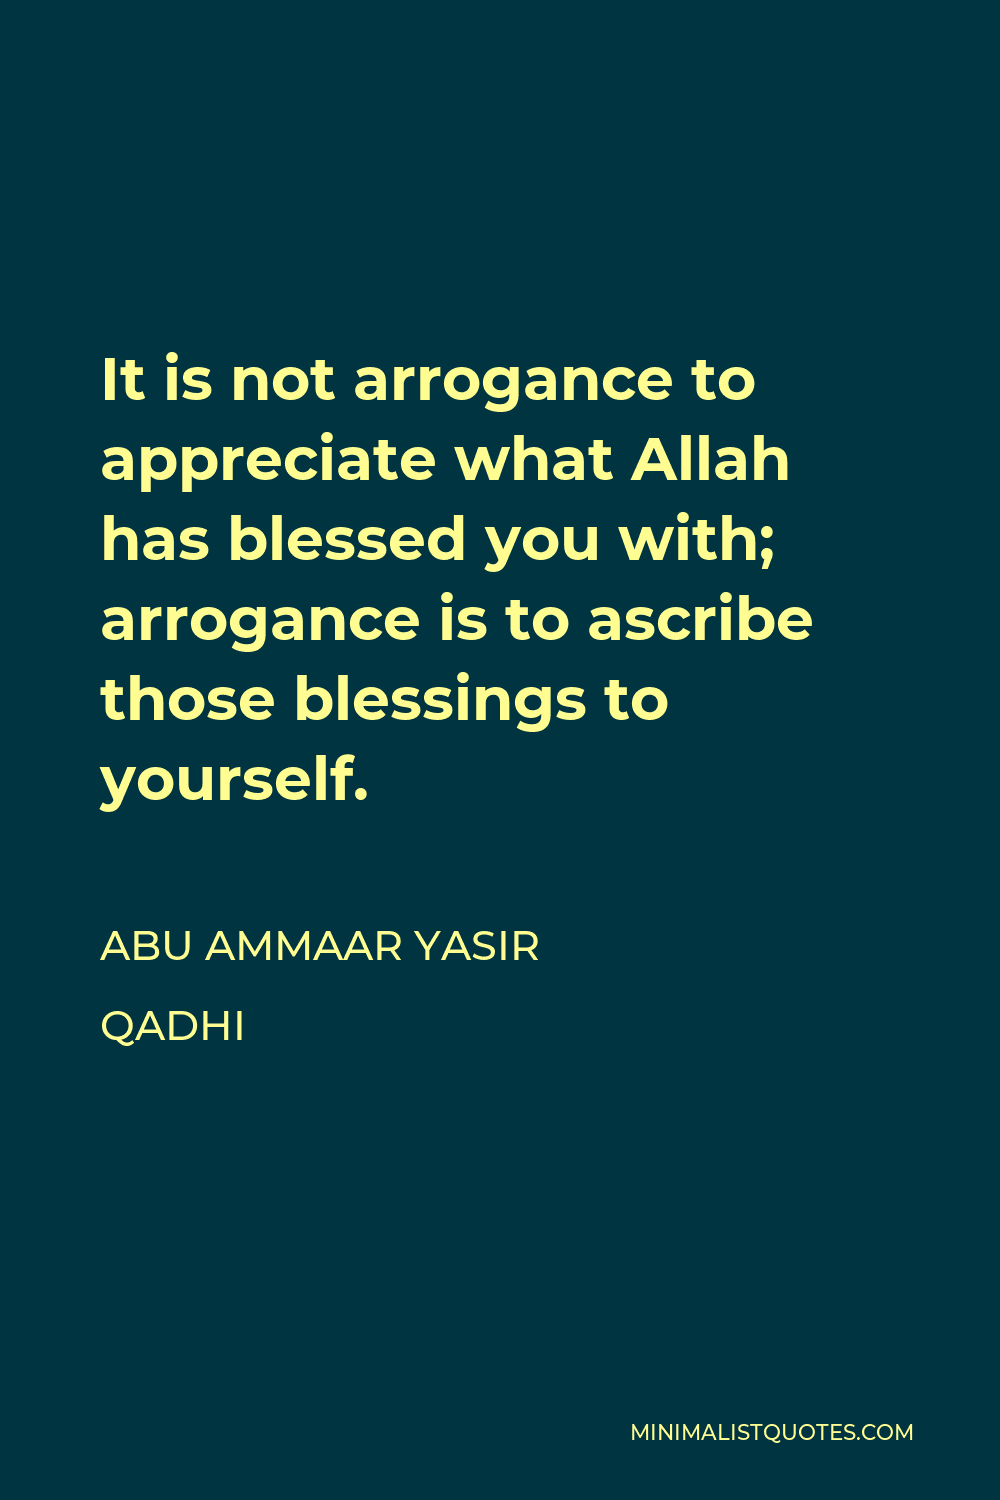 Abu Ammaar Yasir Qadhi Quote - It is not arrogance to appreciate what Allah has blessed you with; arrogance is to ascribe those blessings to yourself.